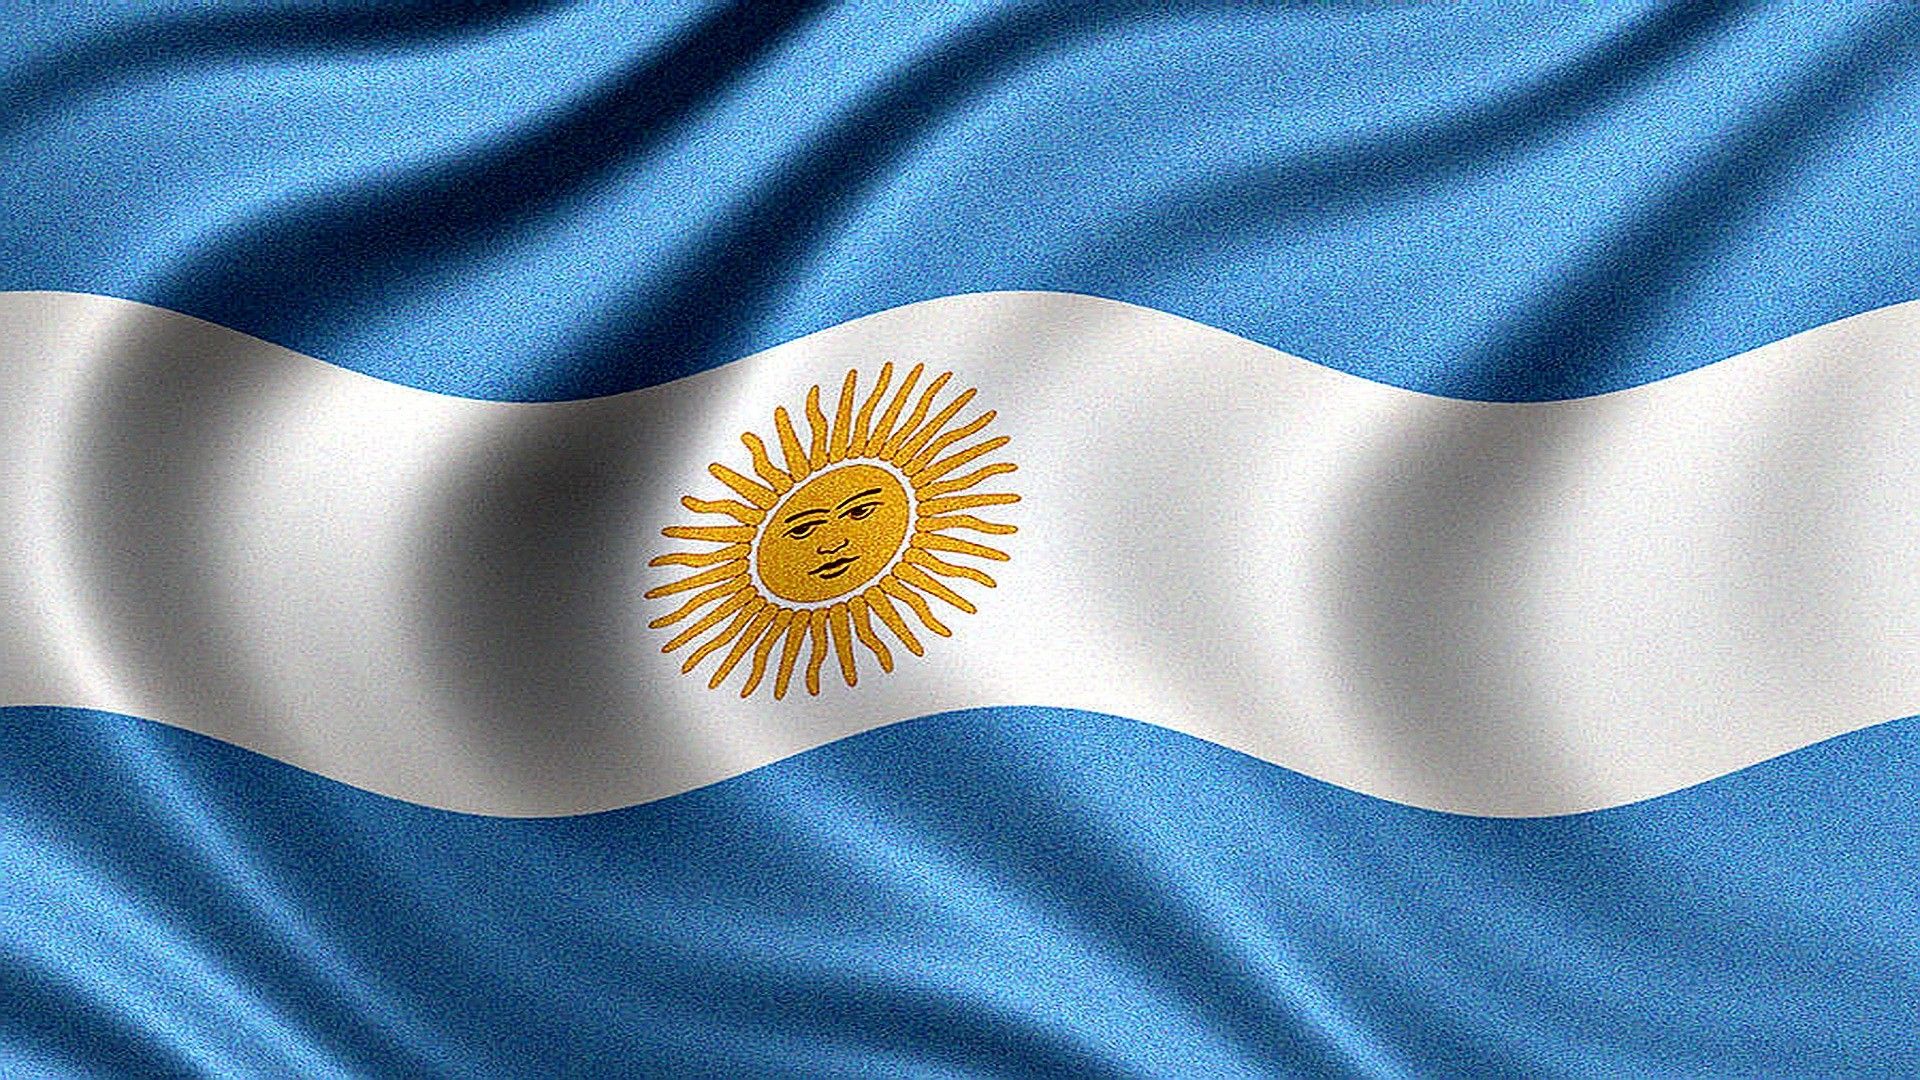 Argentina Flag Wallpapers